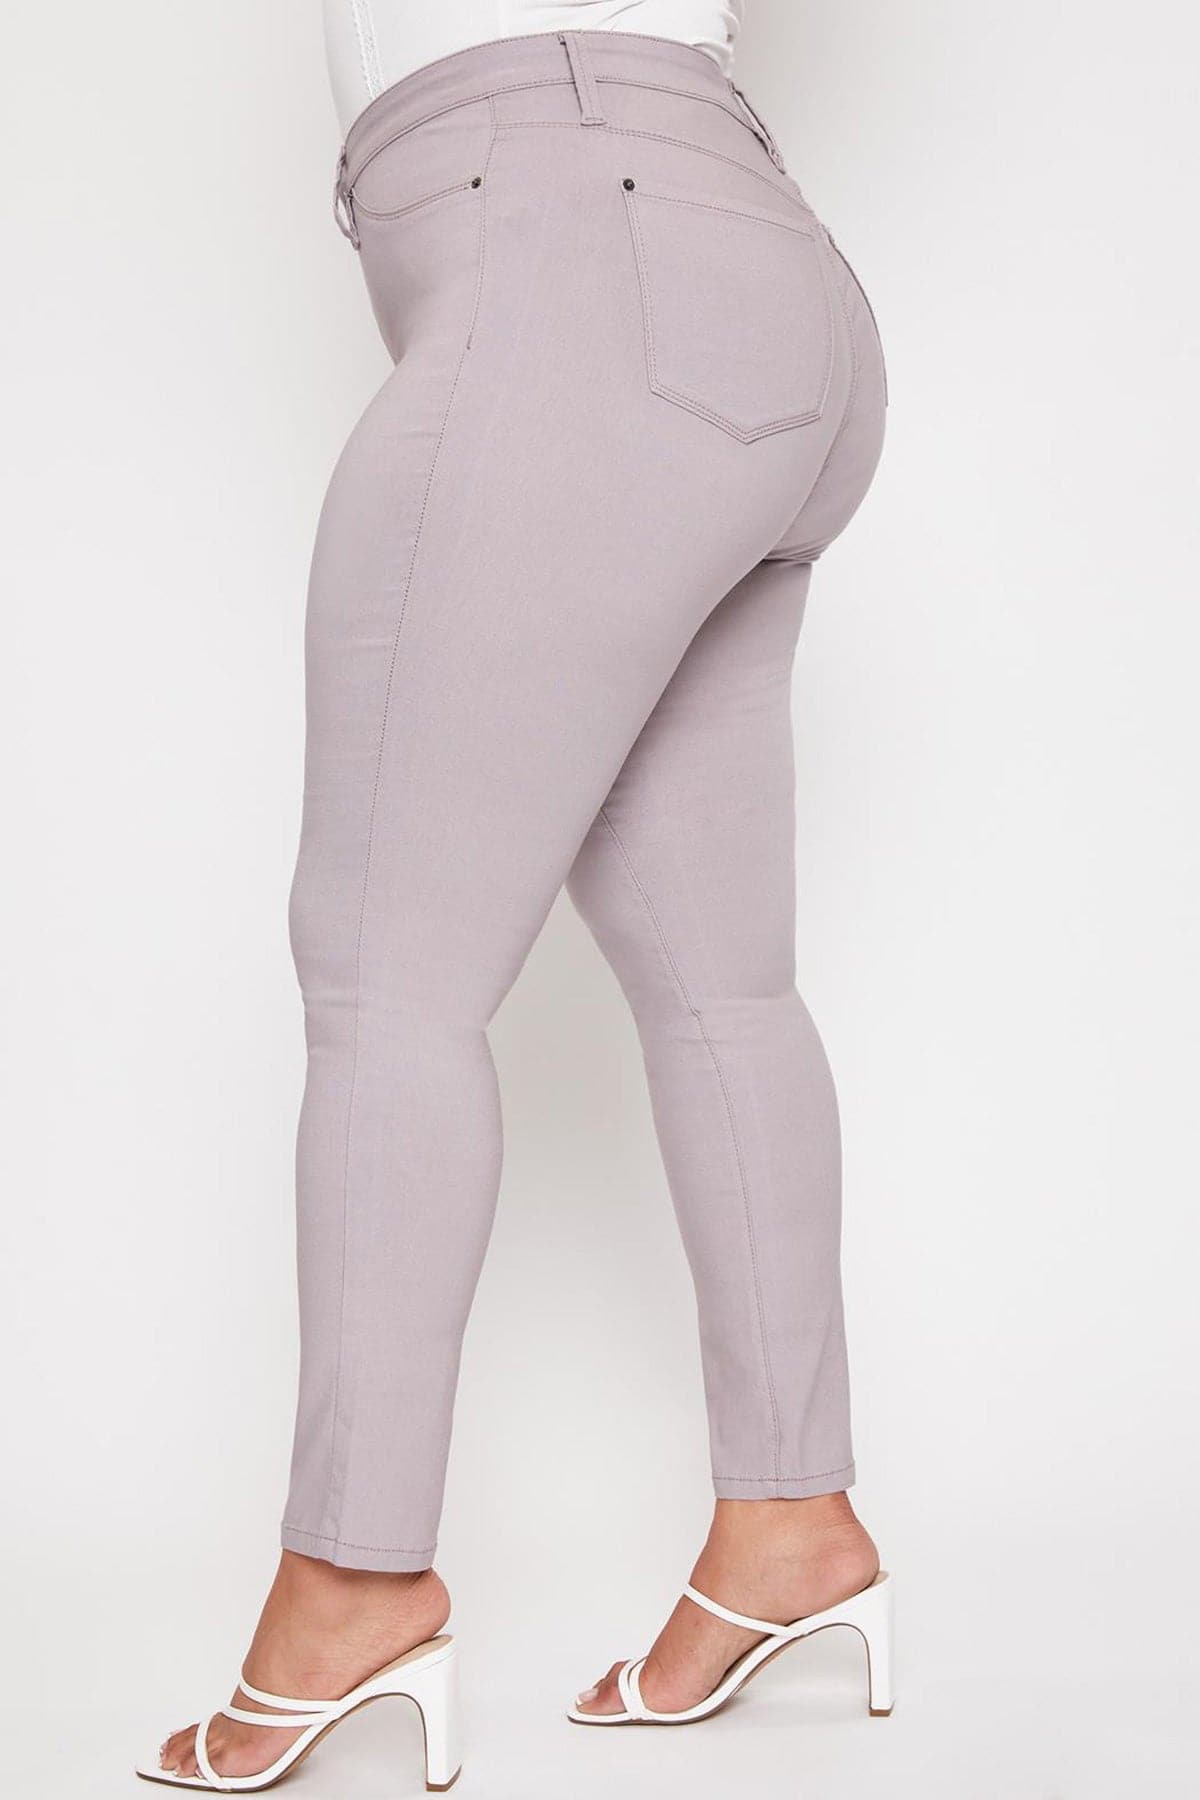 Plus Size Women's Hyperstretch Forever Color Pants - Pastels